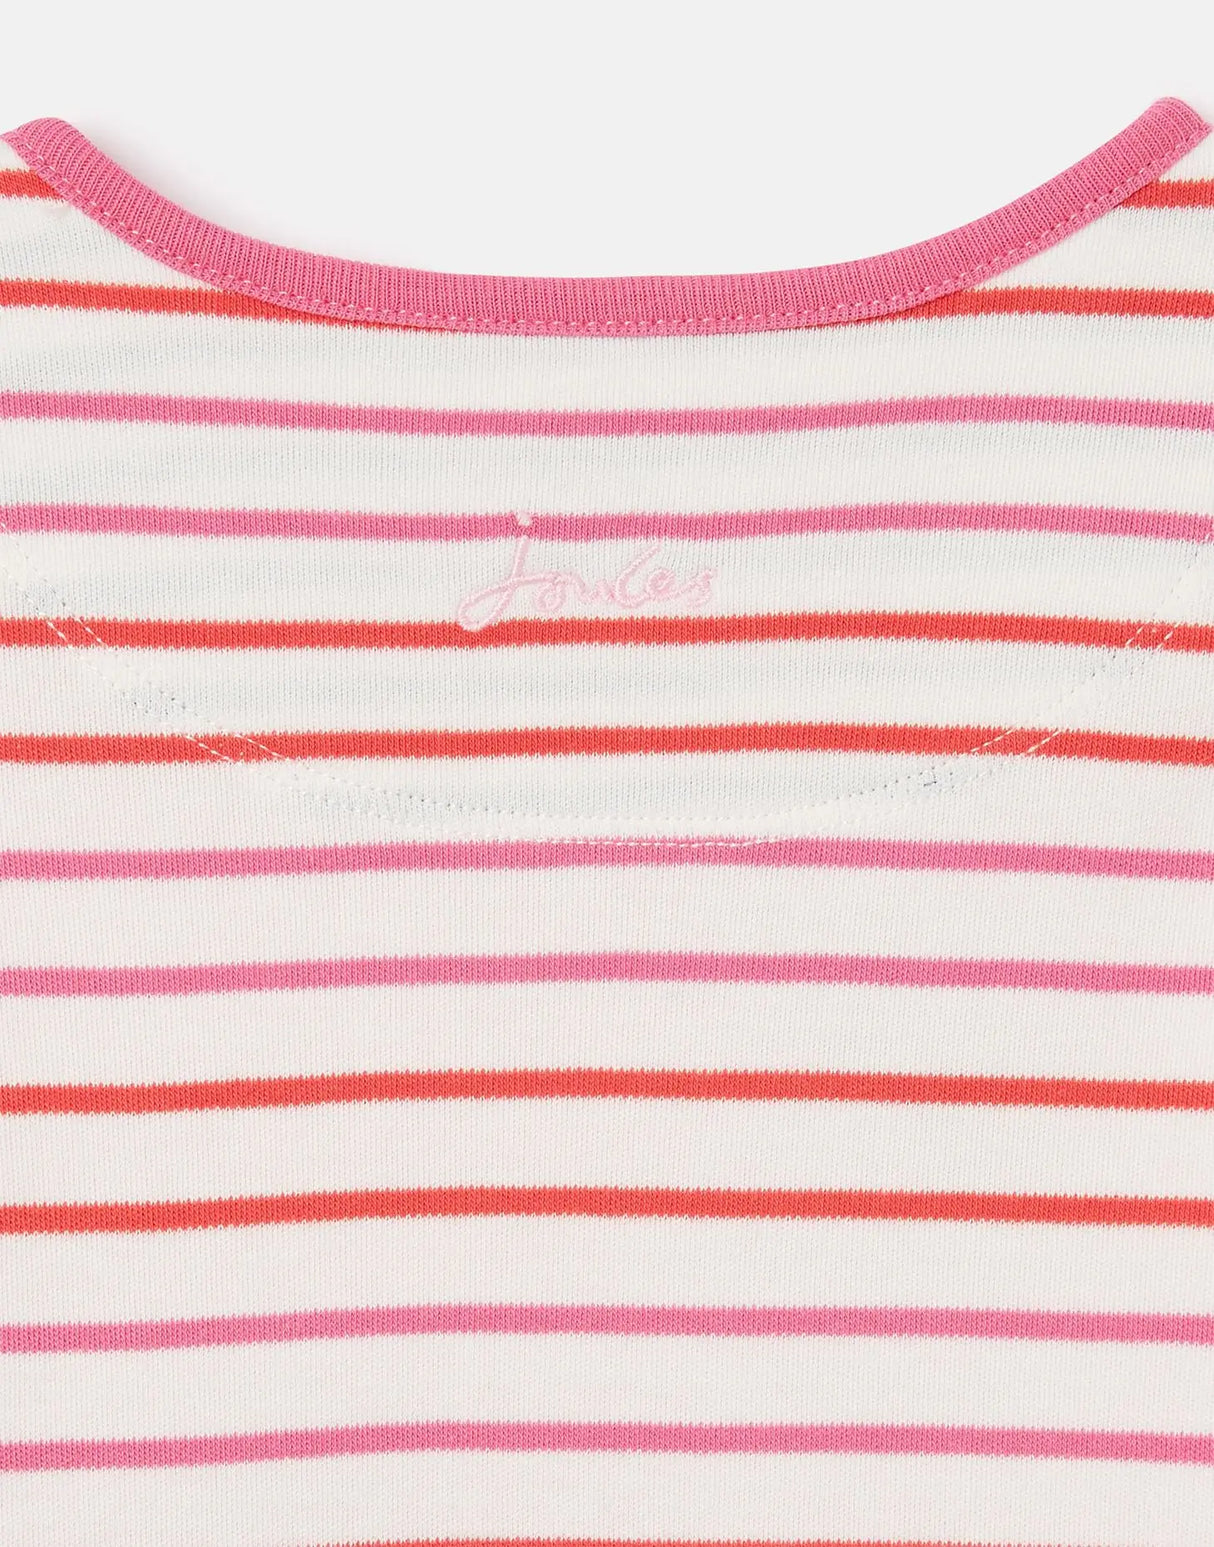 Girl's Tate Artwork Long Sleeve T-Shirt | Joules - Joules